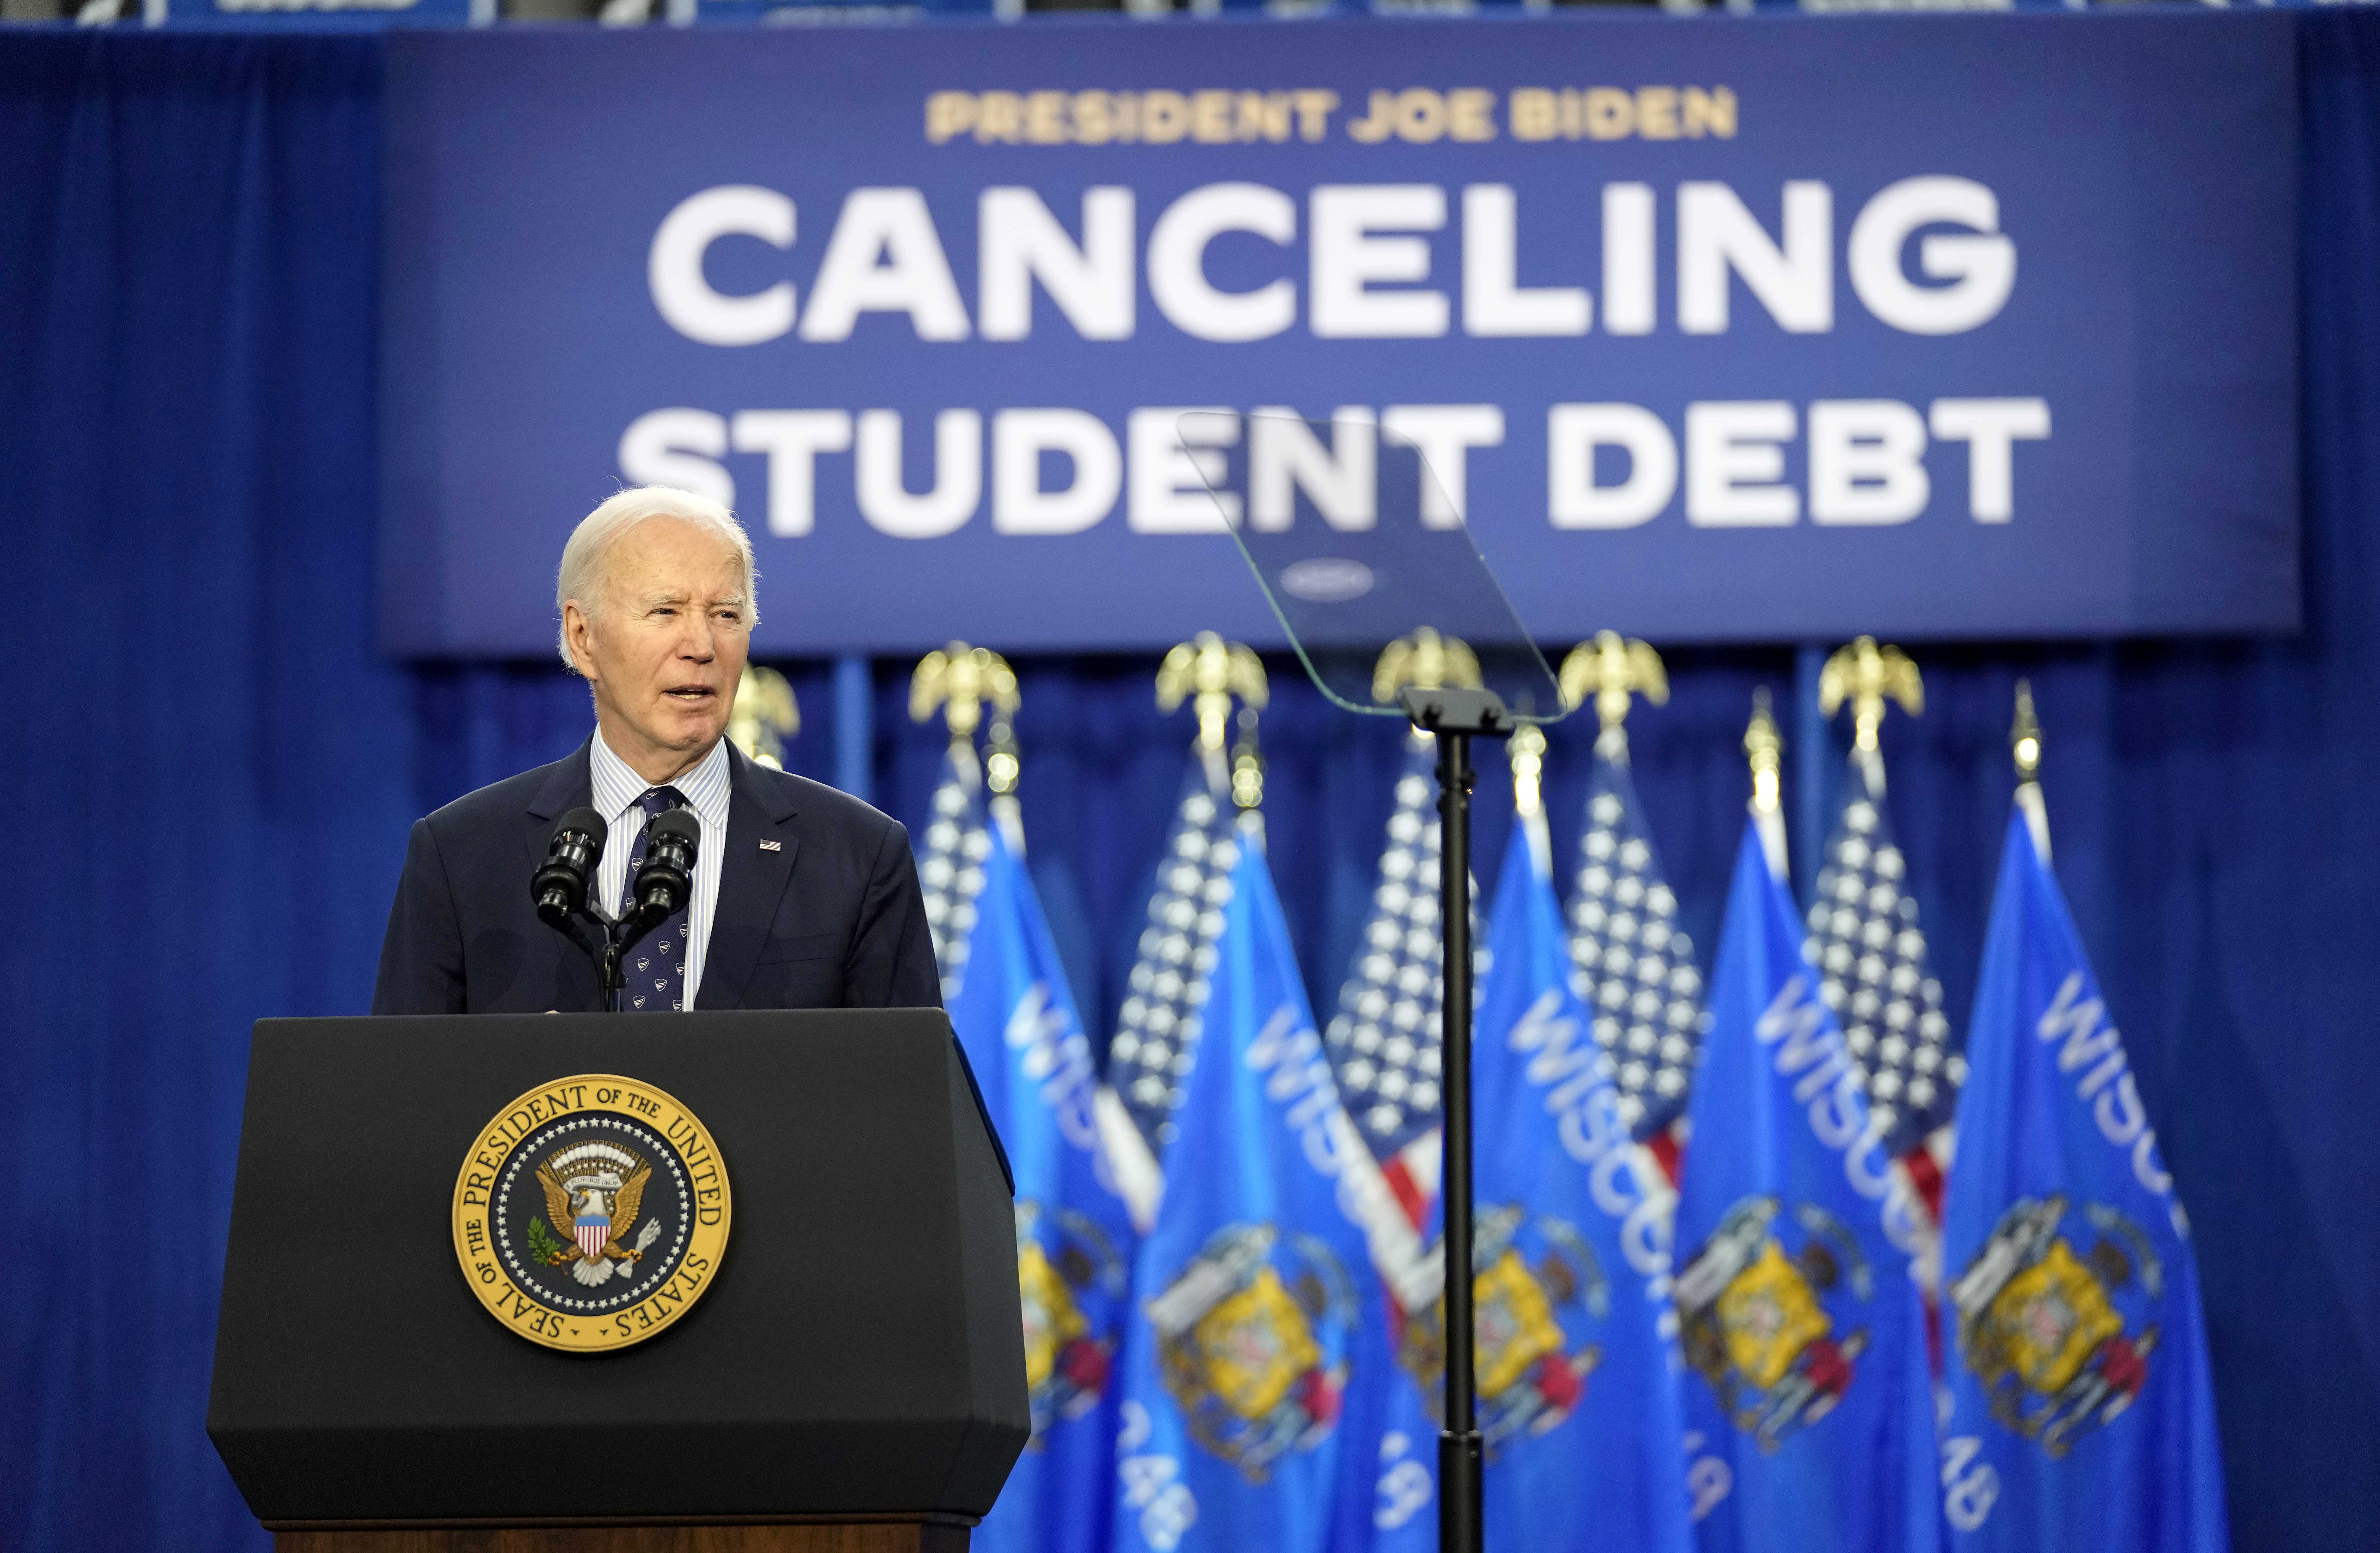 Biden promotes ‘life-changing' student loan relief in Wisconsin as
he rallies younger voters